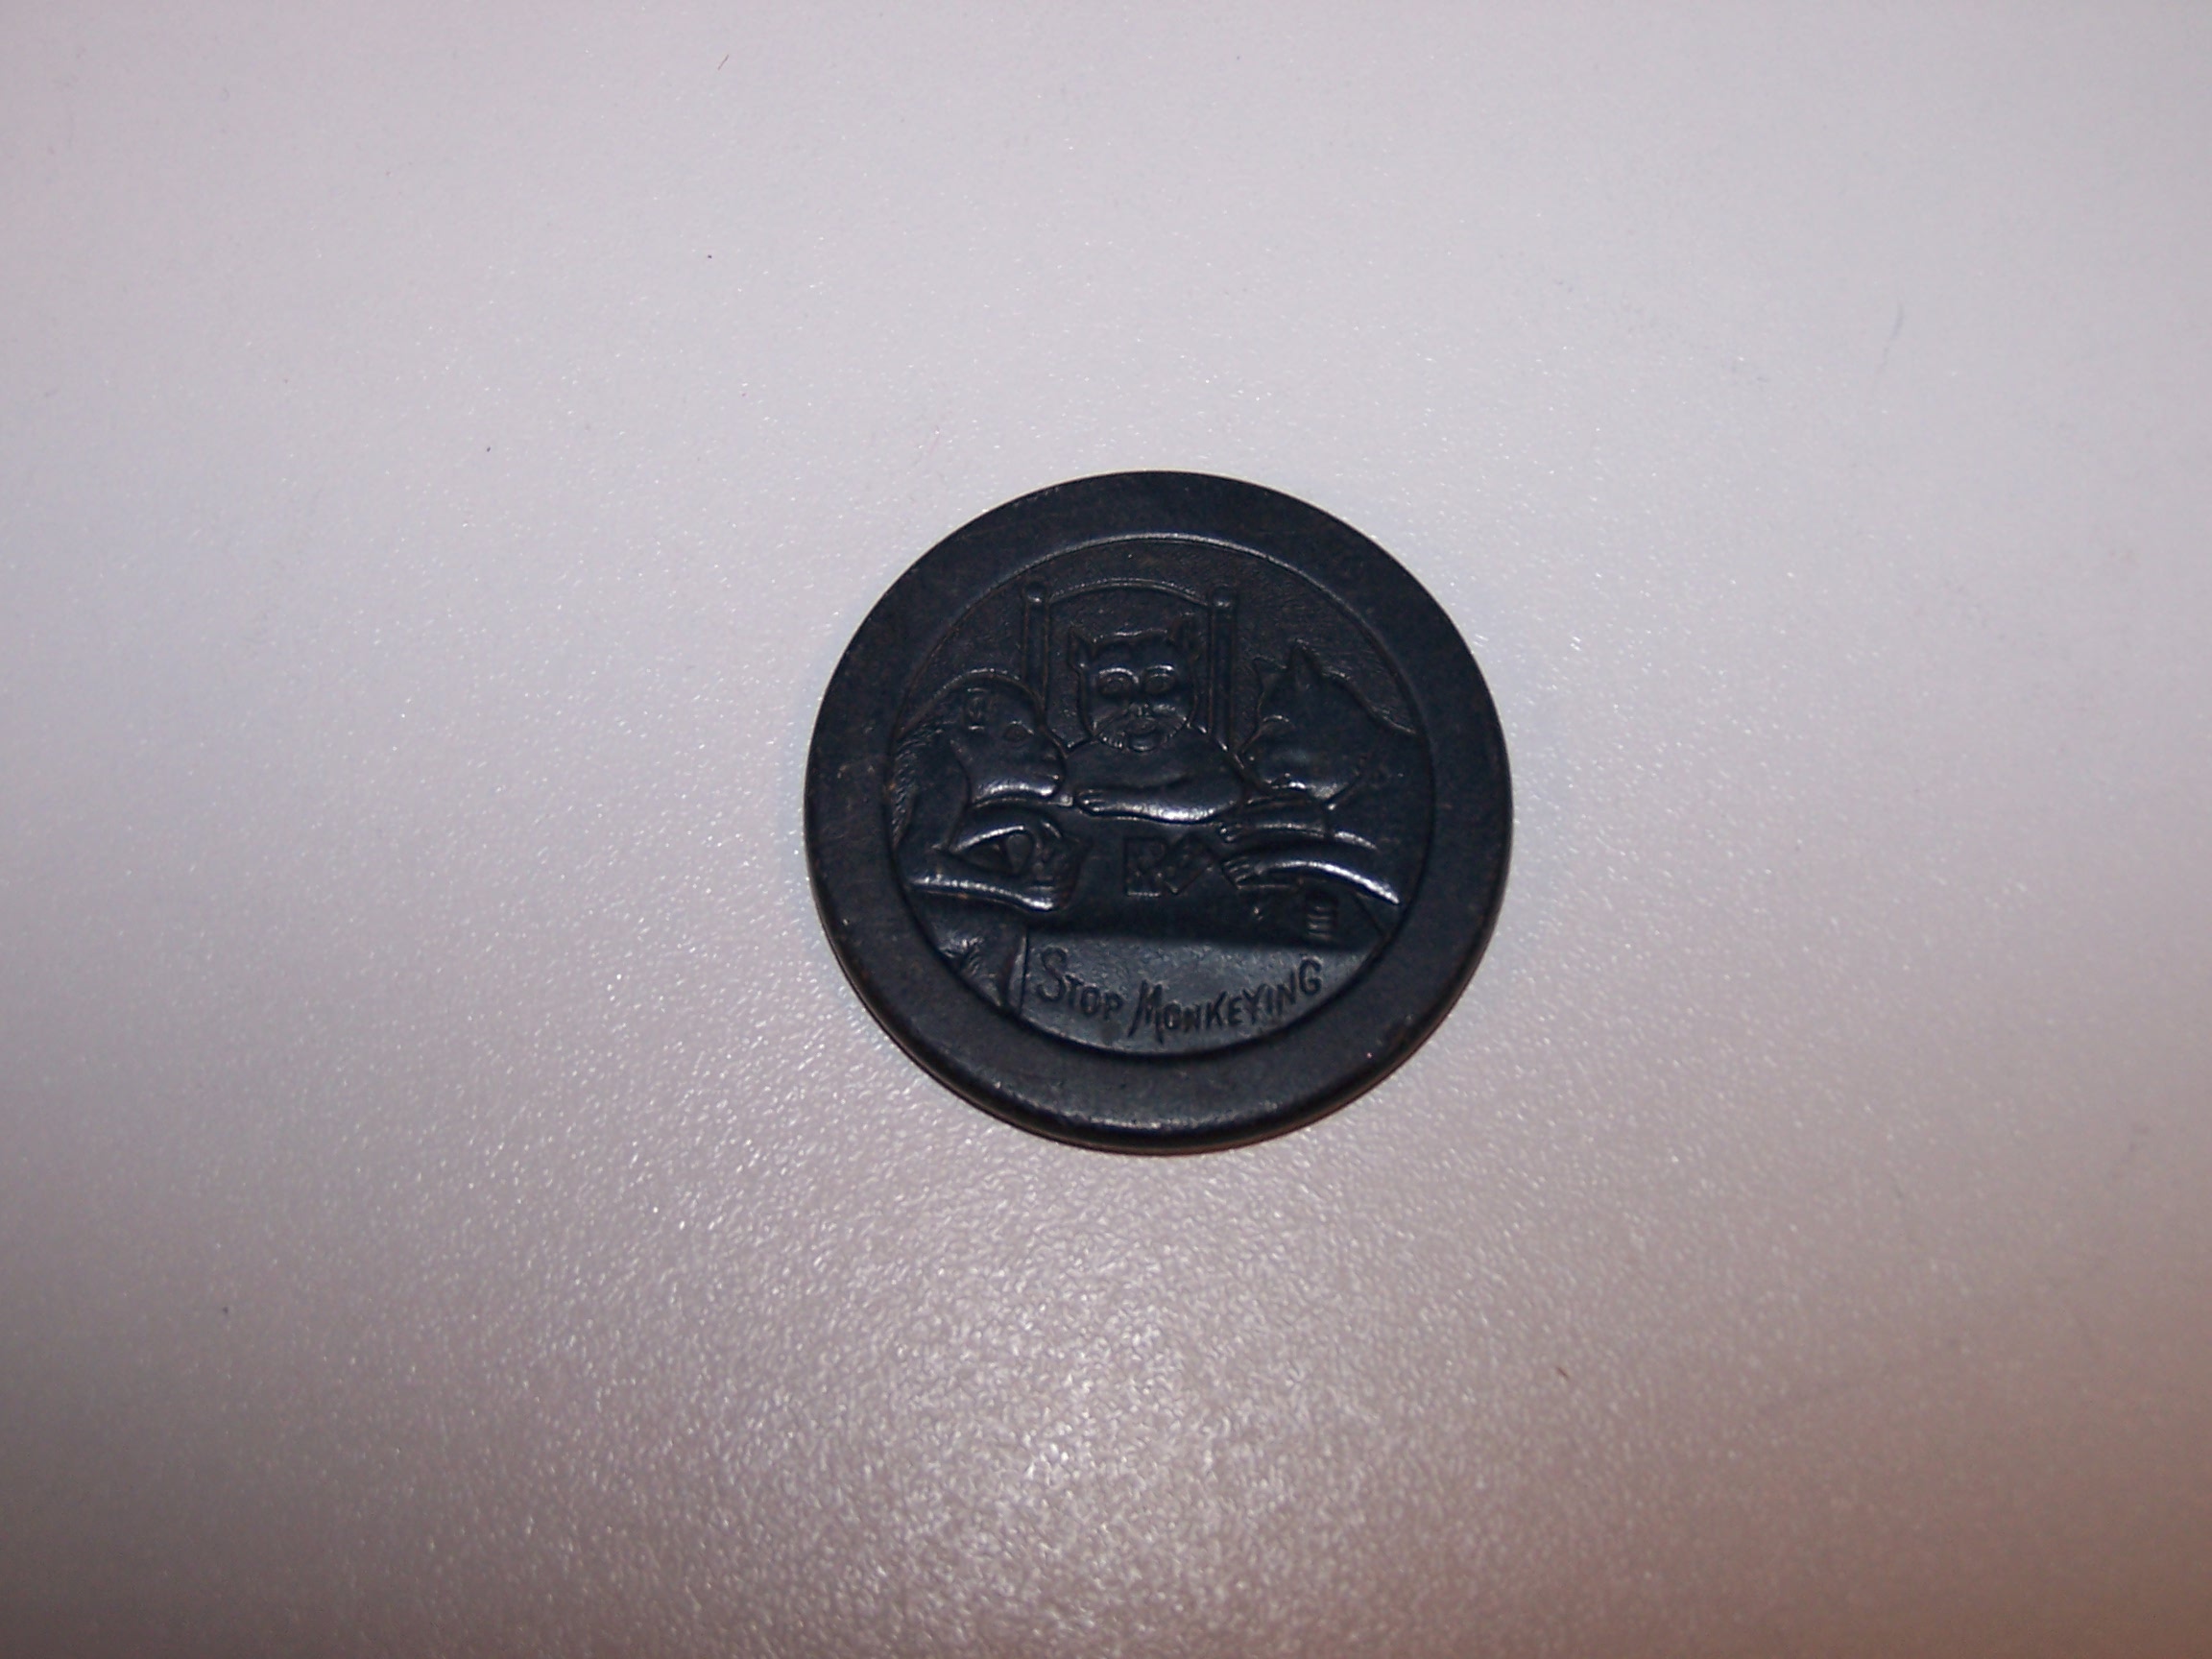 Image 2 of Stop Monkeying Poker Chip, Clay, Black